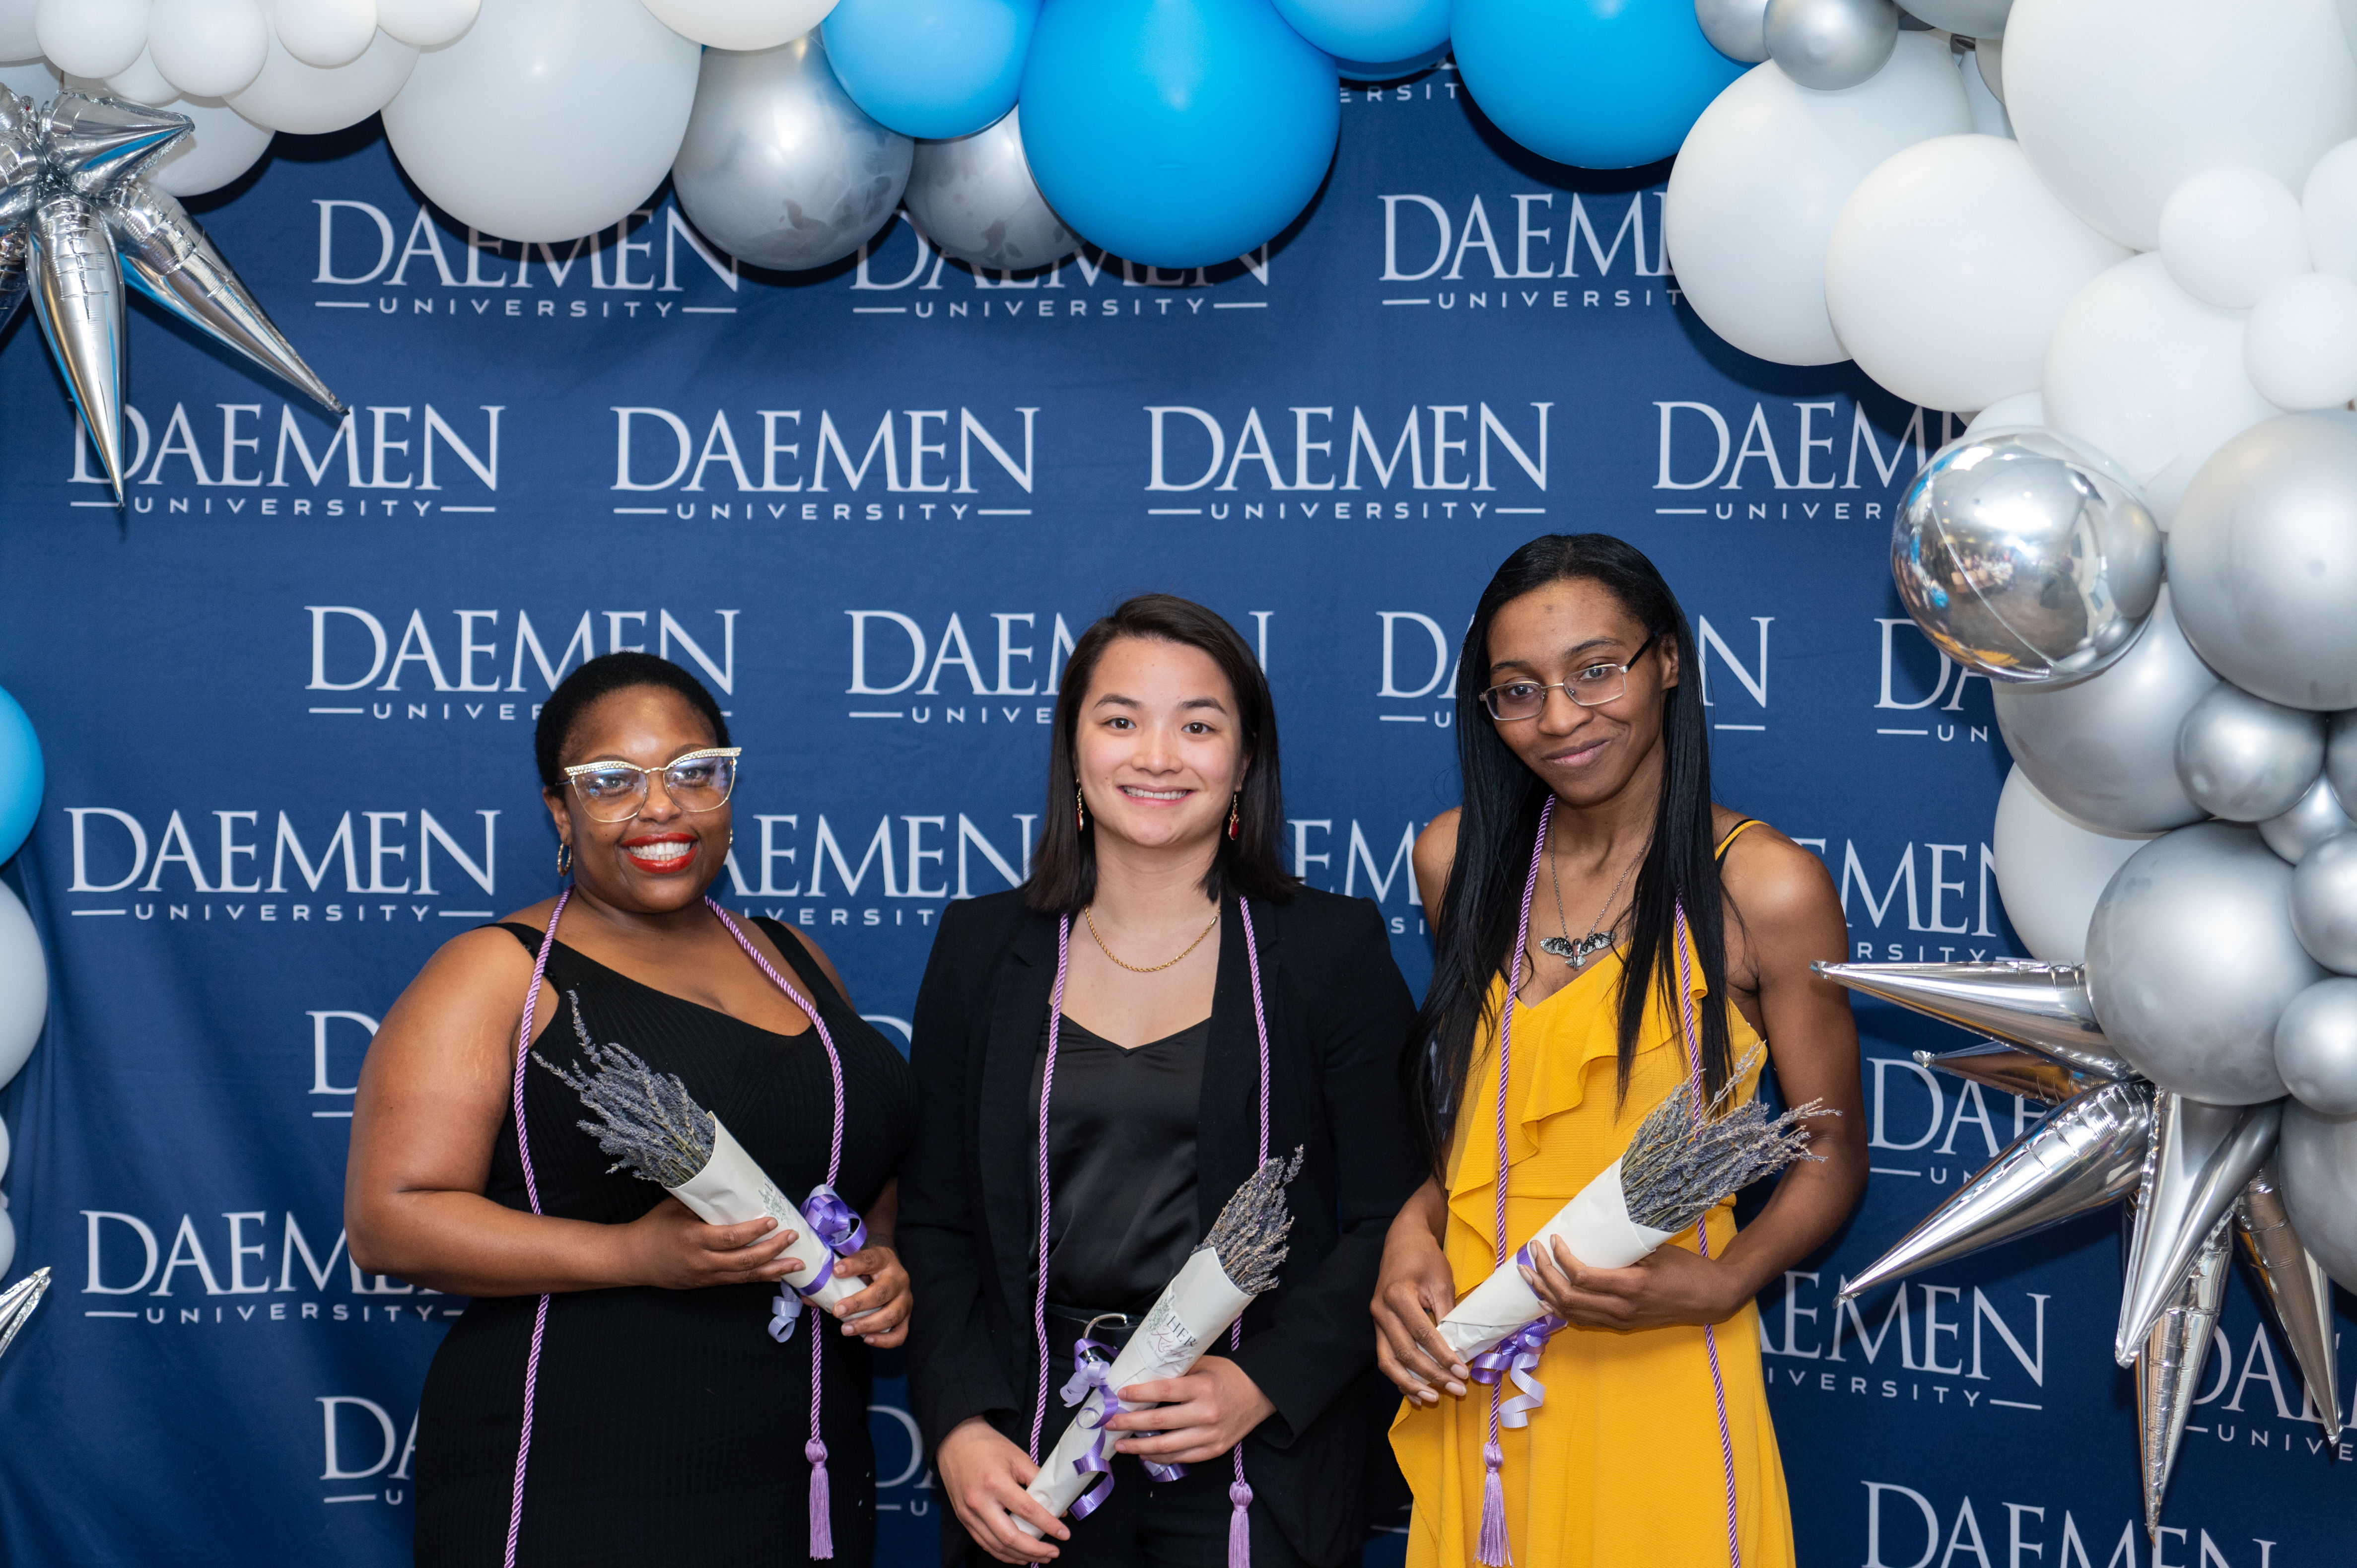 Graduates who have give approval of photo sharing standing in front of Daemen backdrop holding bouquets of lavender and wearing lavender honor ropes